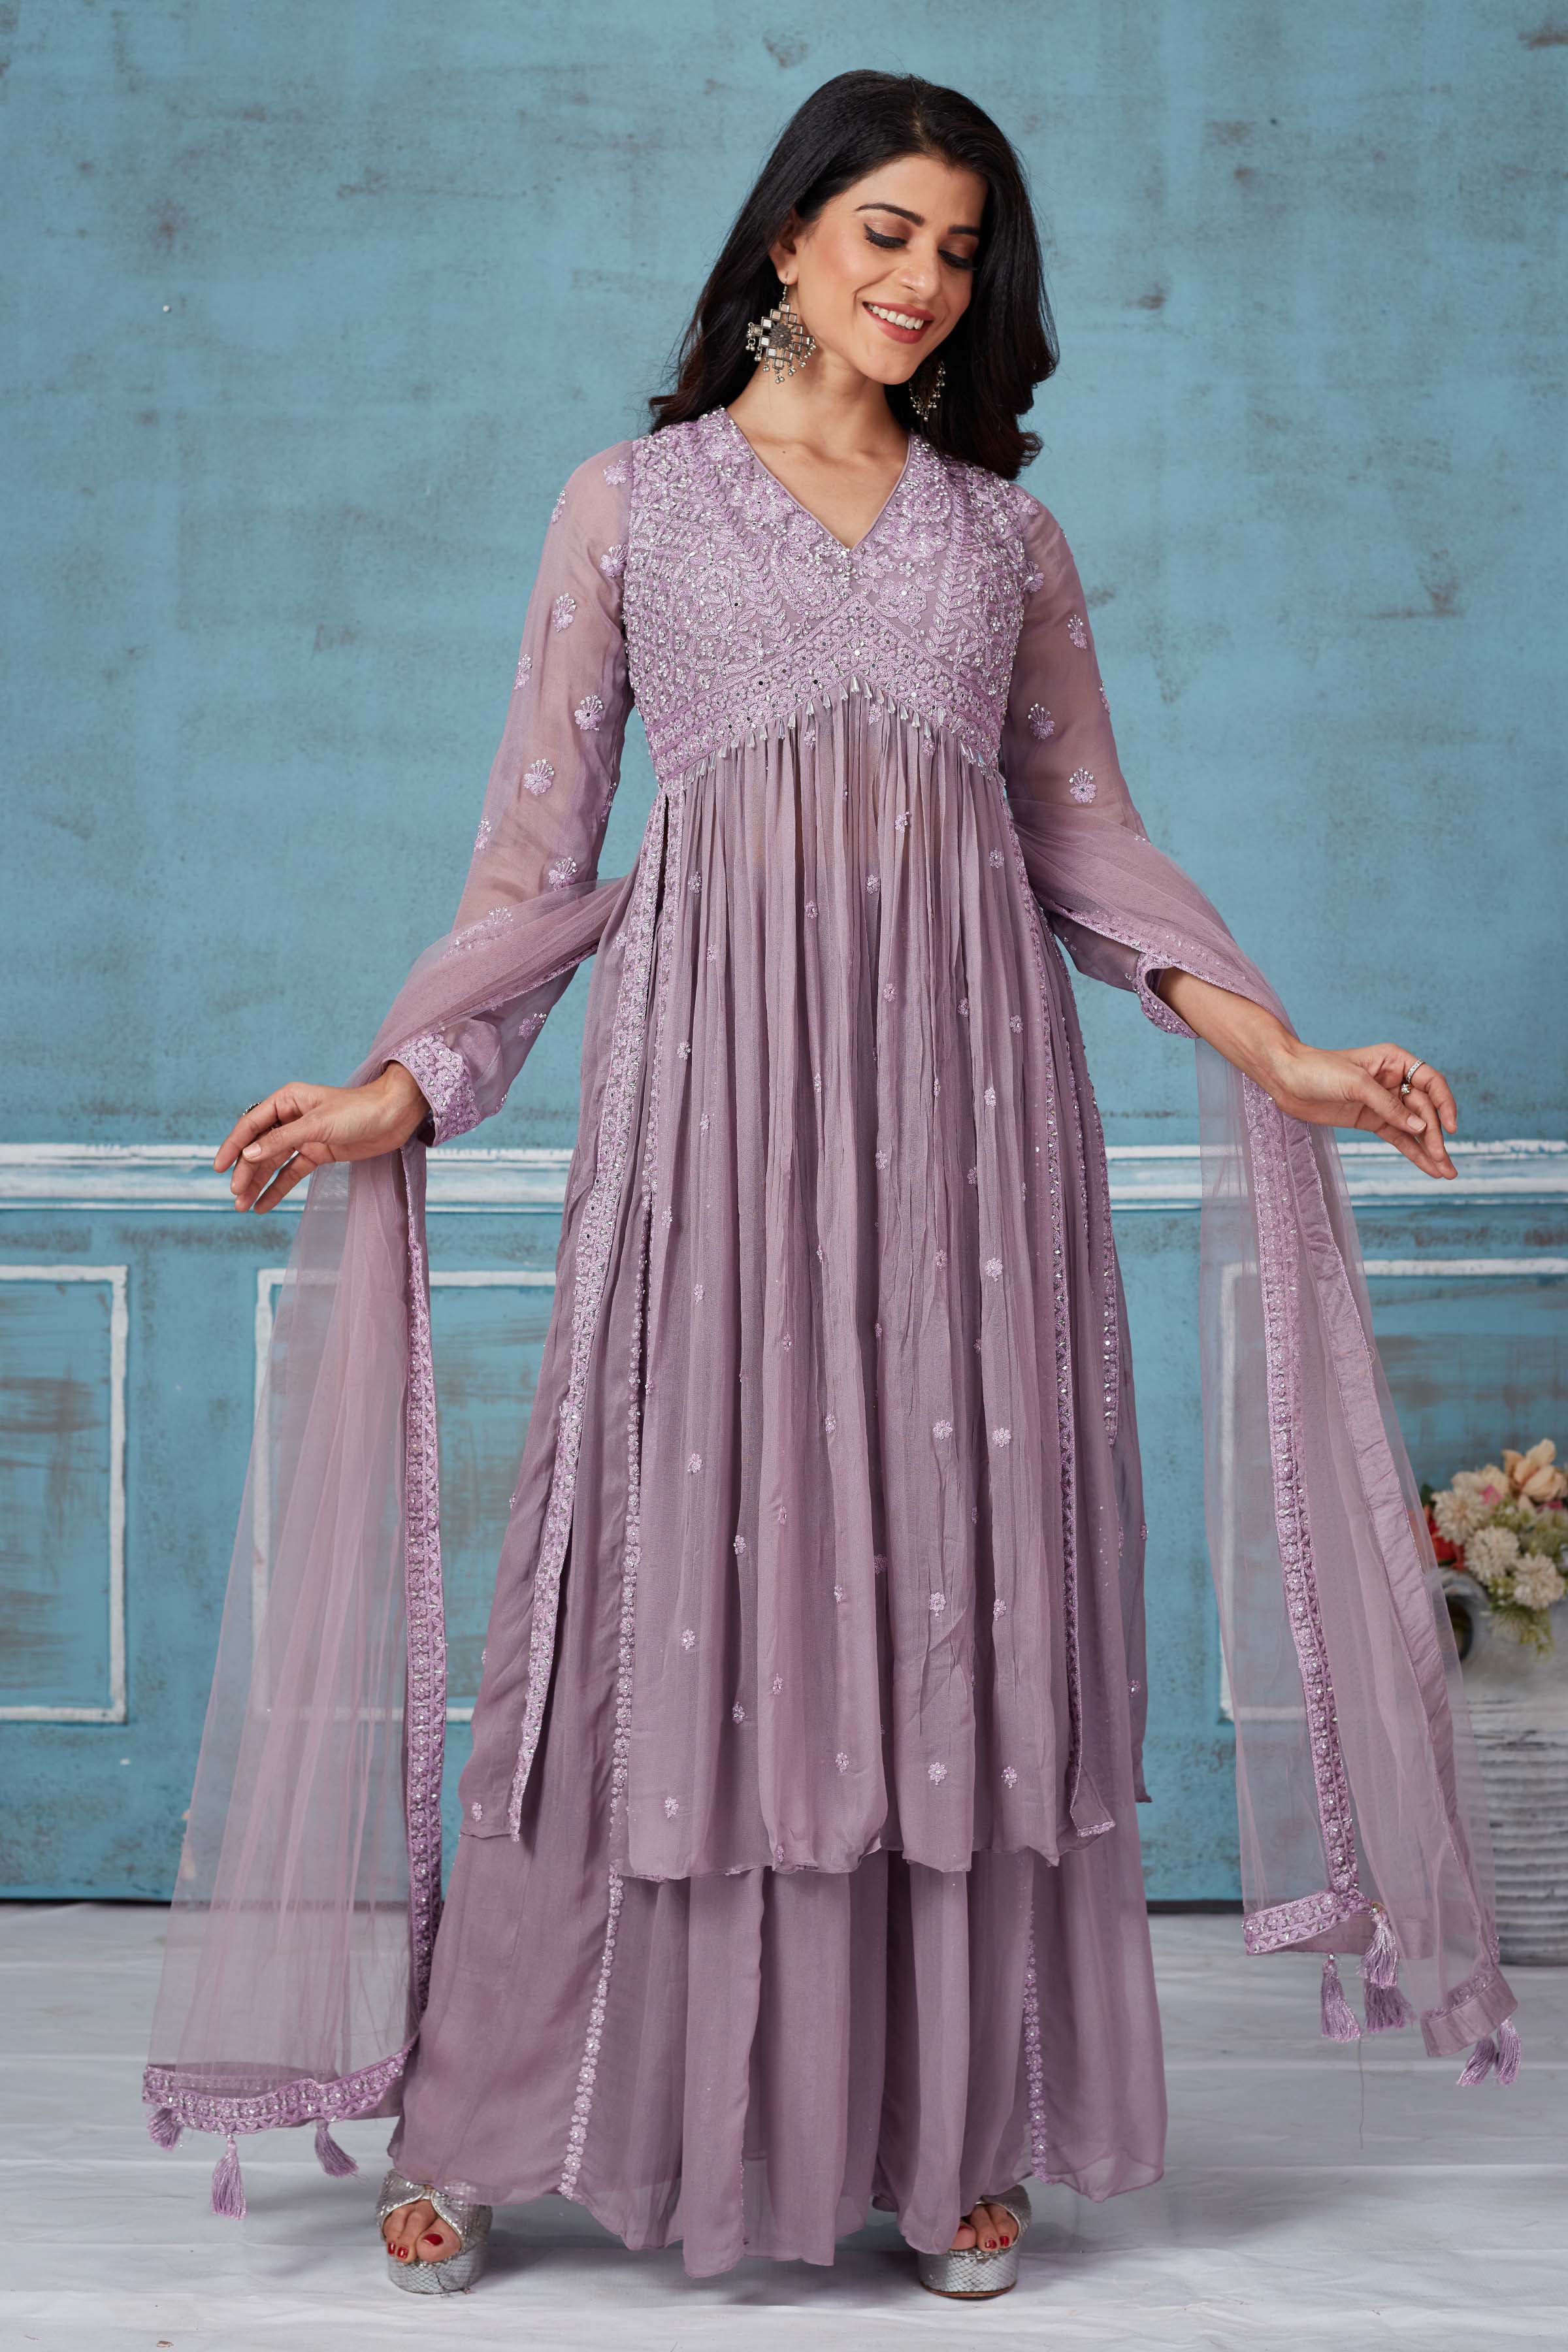 Buy lavender embroidered georgette palazzo suit online in USA with dupatta. Look royal on special occasions in exquisite designer lehengas, pure silk sarees, handloom sarees, Bollywood sarees, Anarkali suits, Banarasi sarees, organza sarees from Pure Elegance Indian saree store in USA.-full view